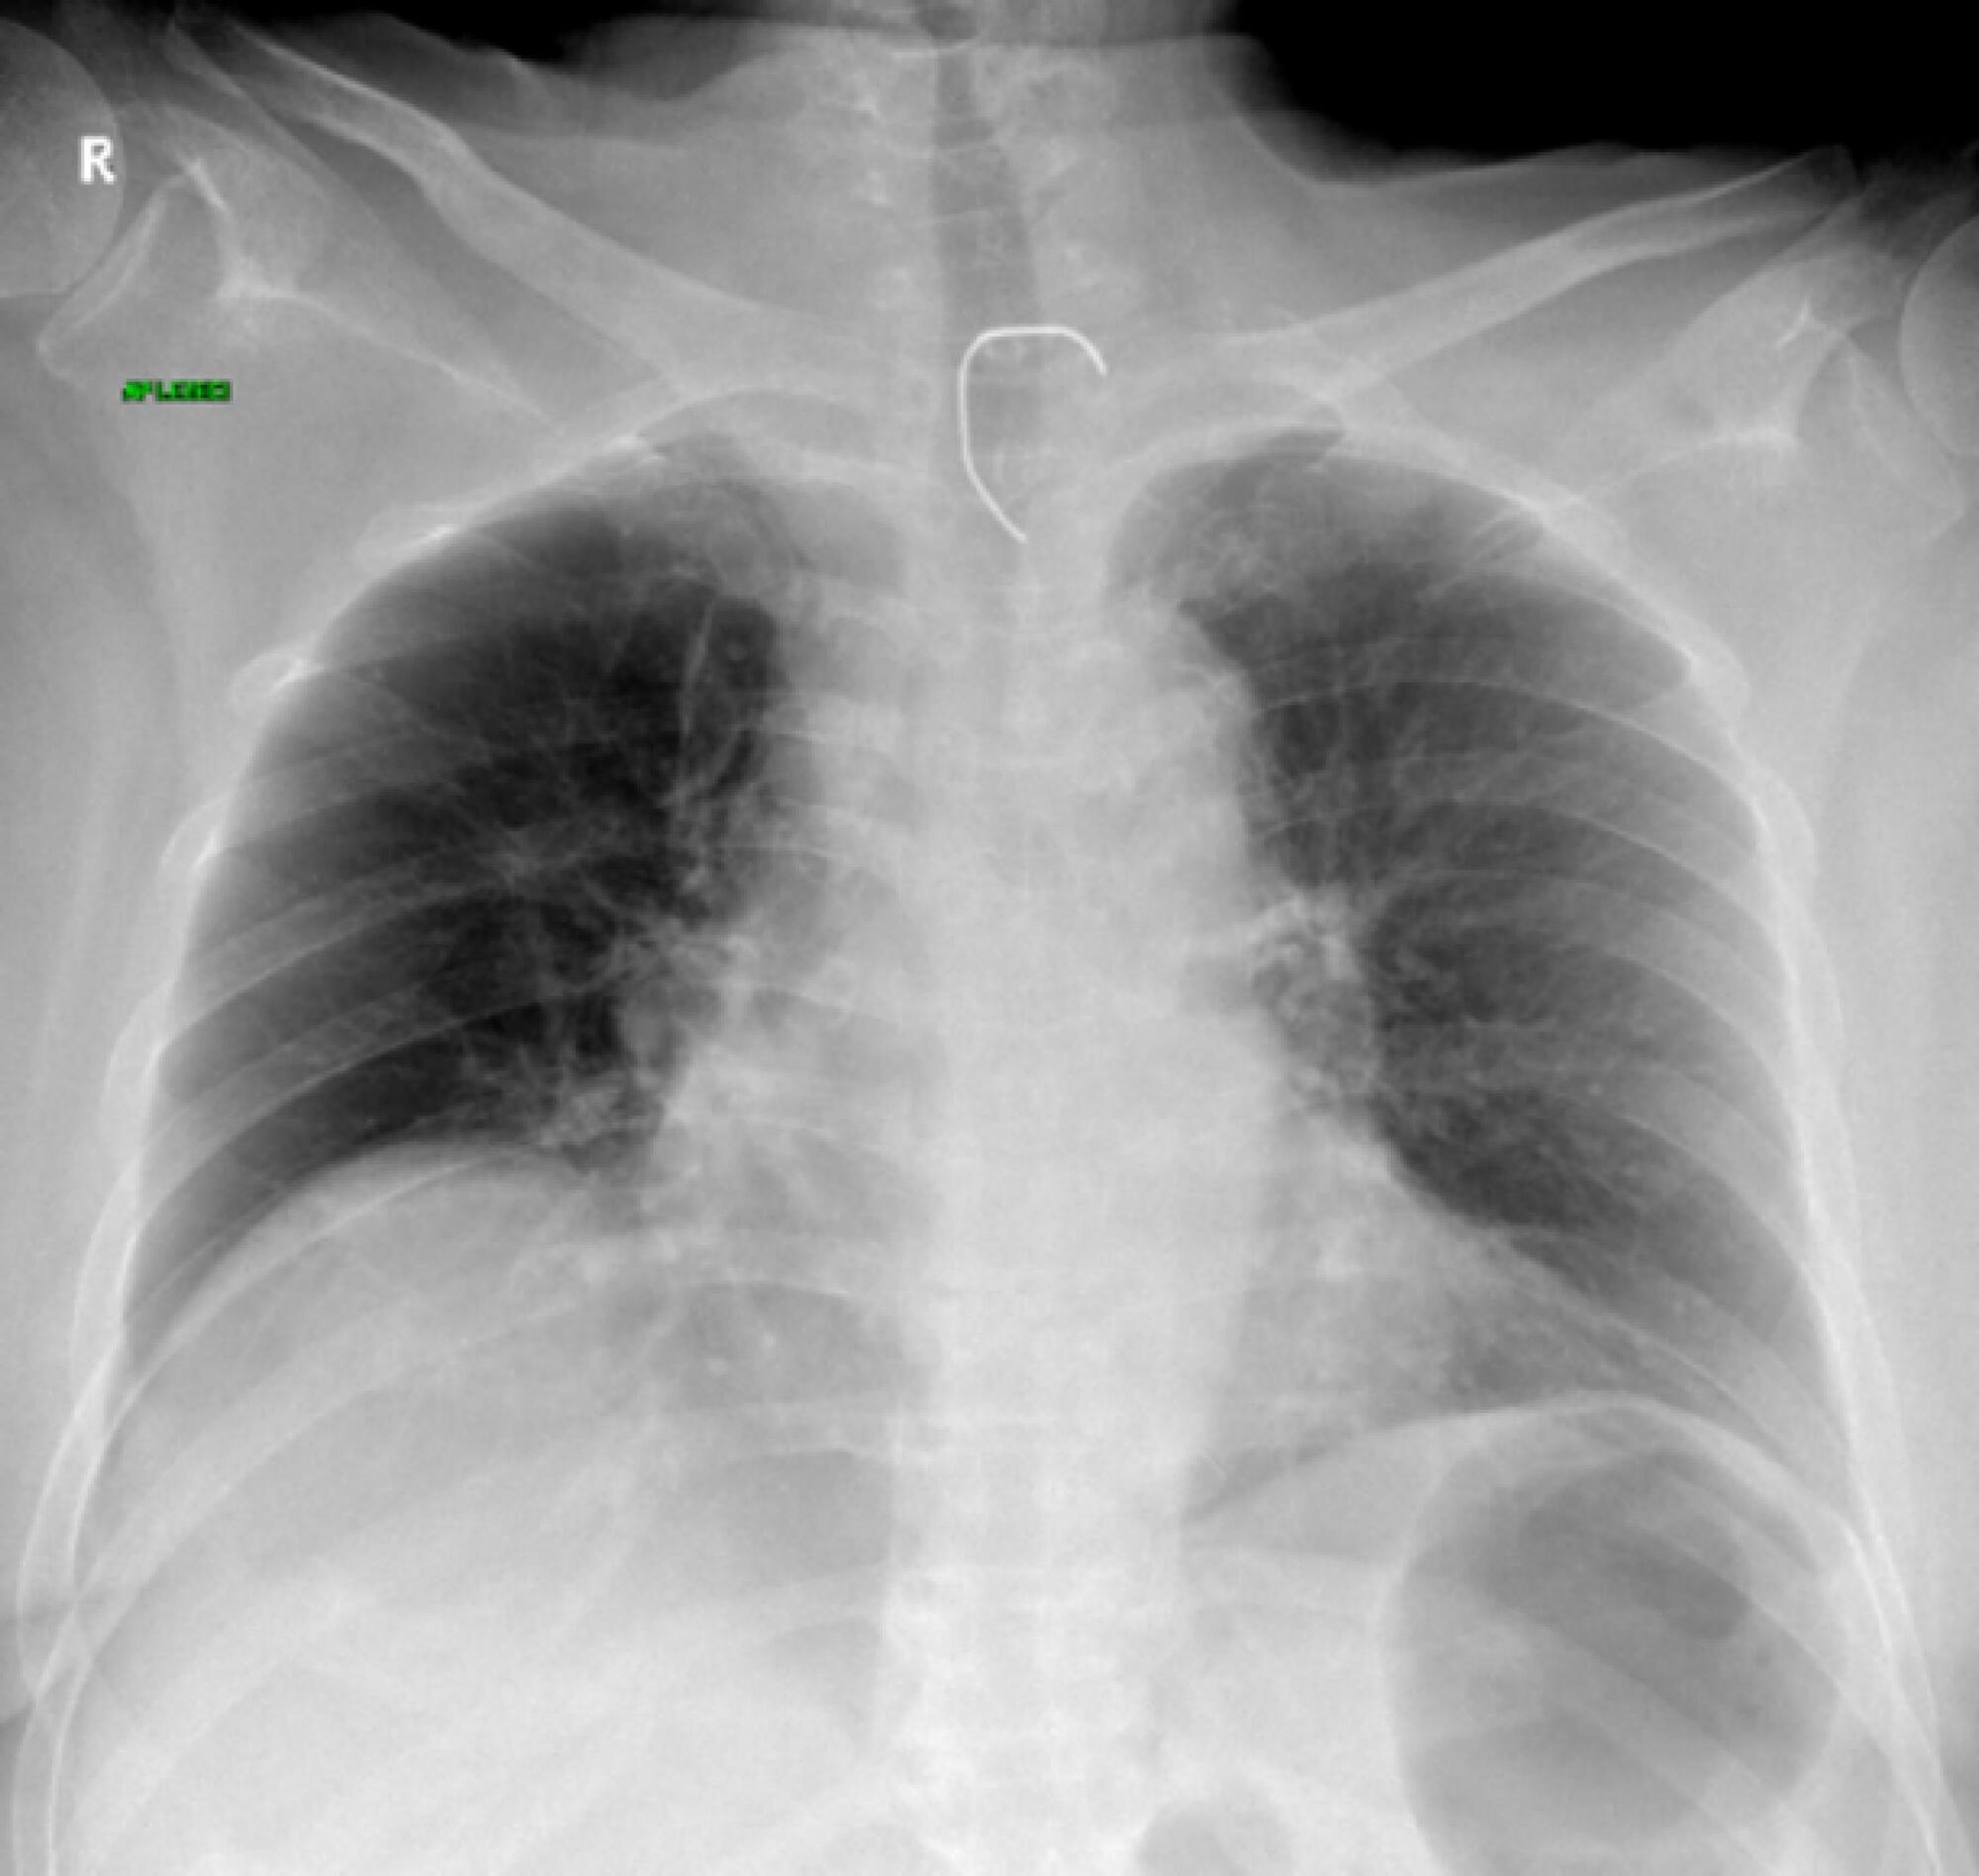 Multiple organ dysfunction caused by a foreign body in the esophagus